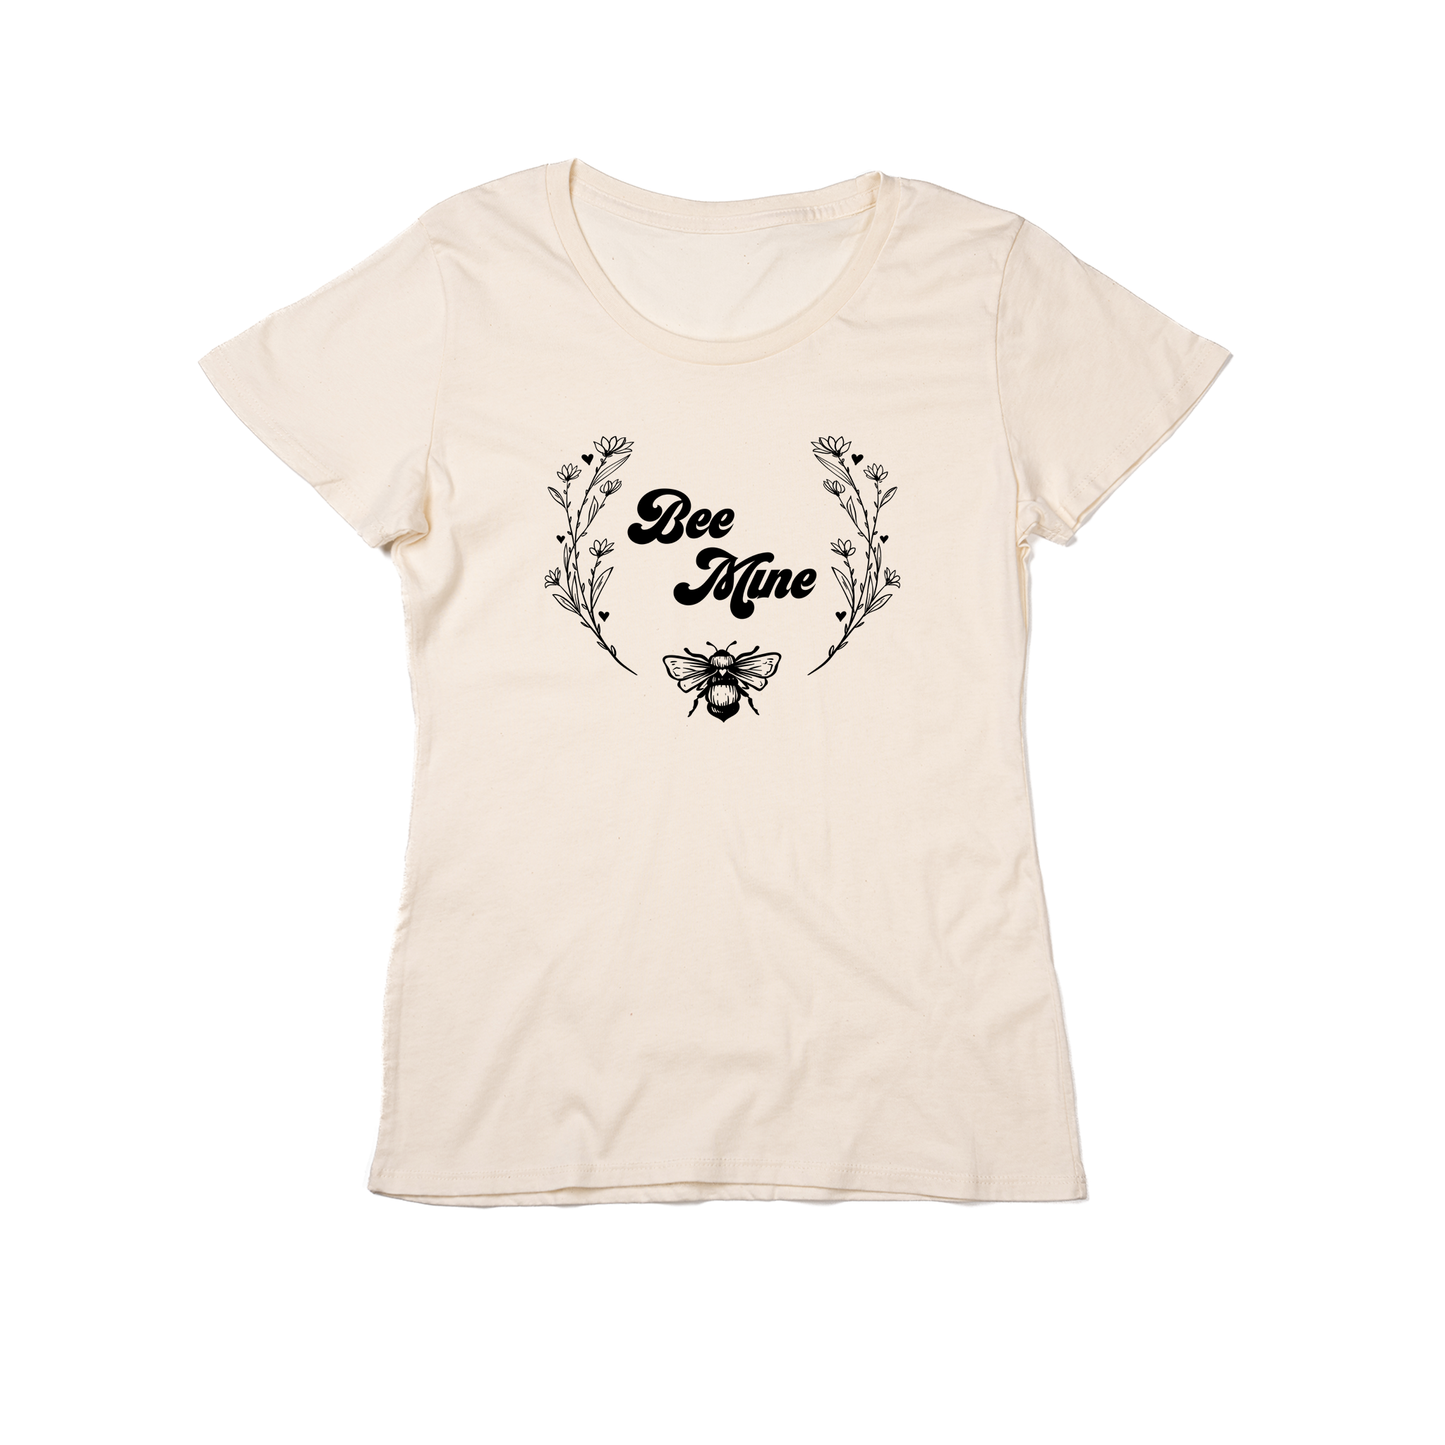 Bee Mine - Women's Fitted Tee (Natural)